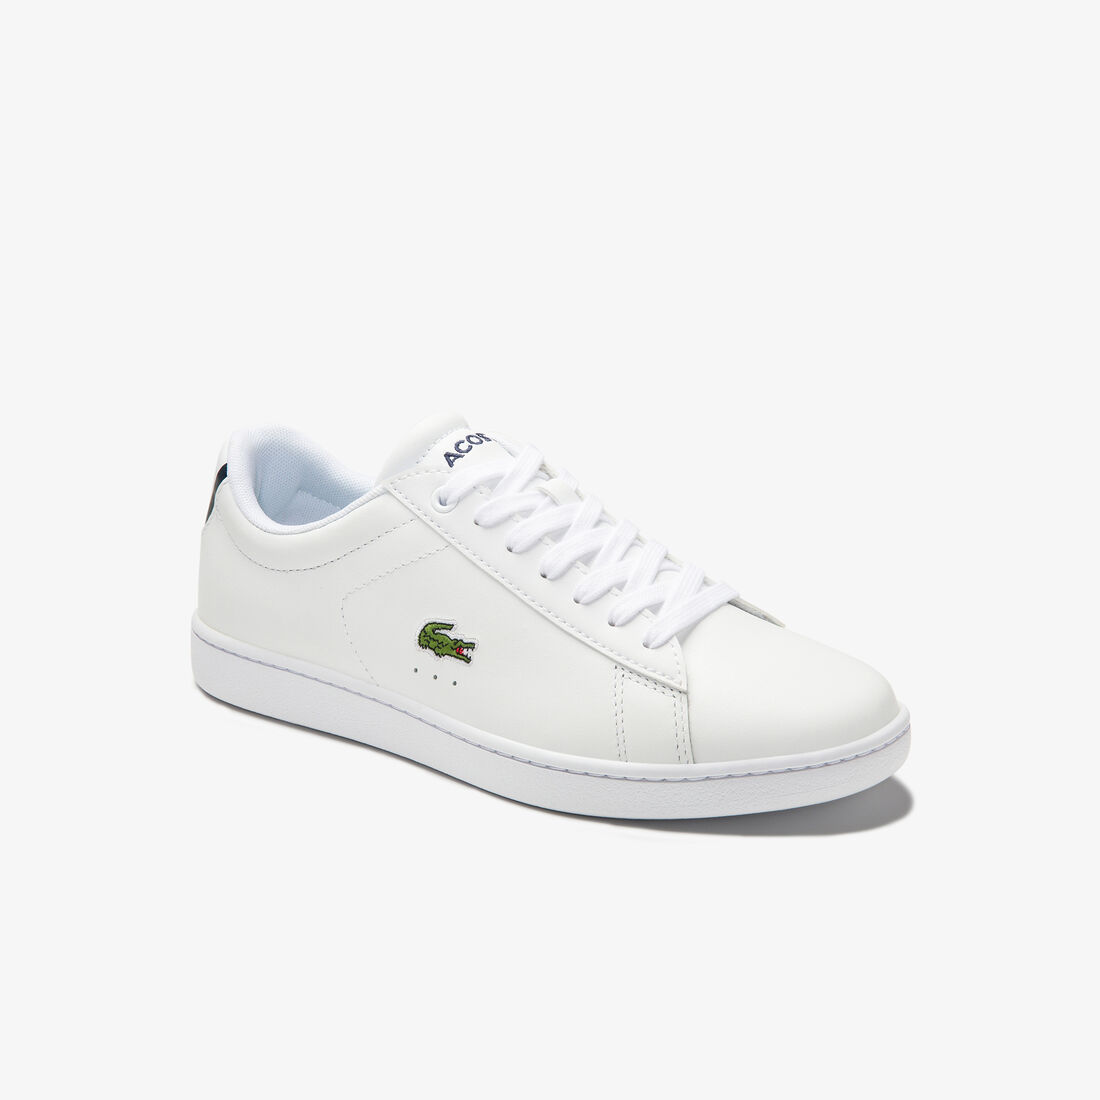 Women's Carnaby Evo Mesh-lined Leather Trainers